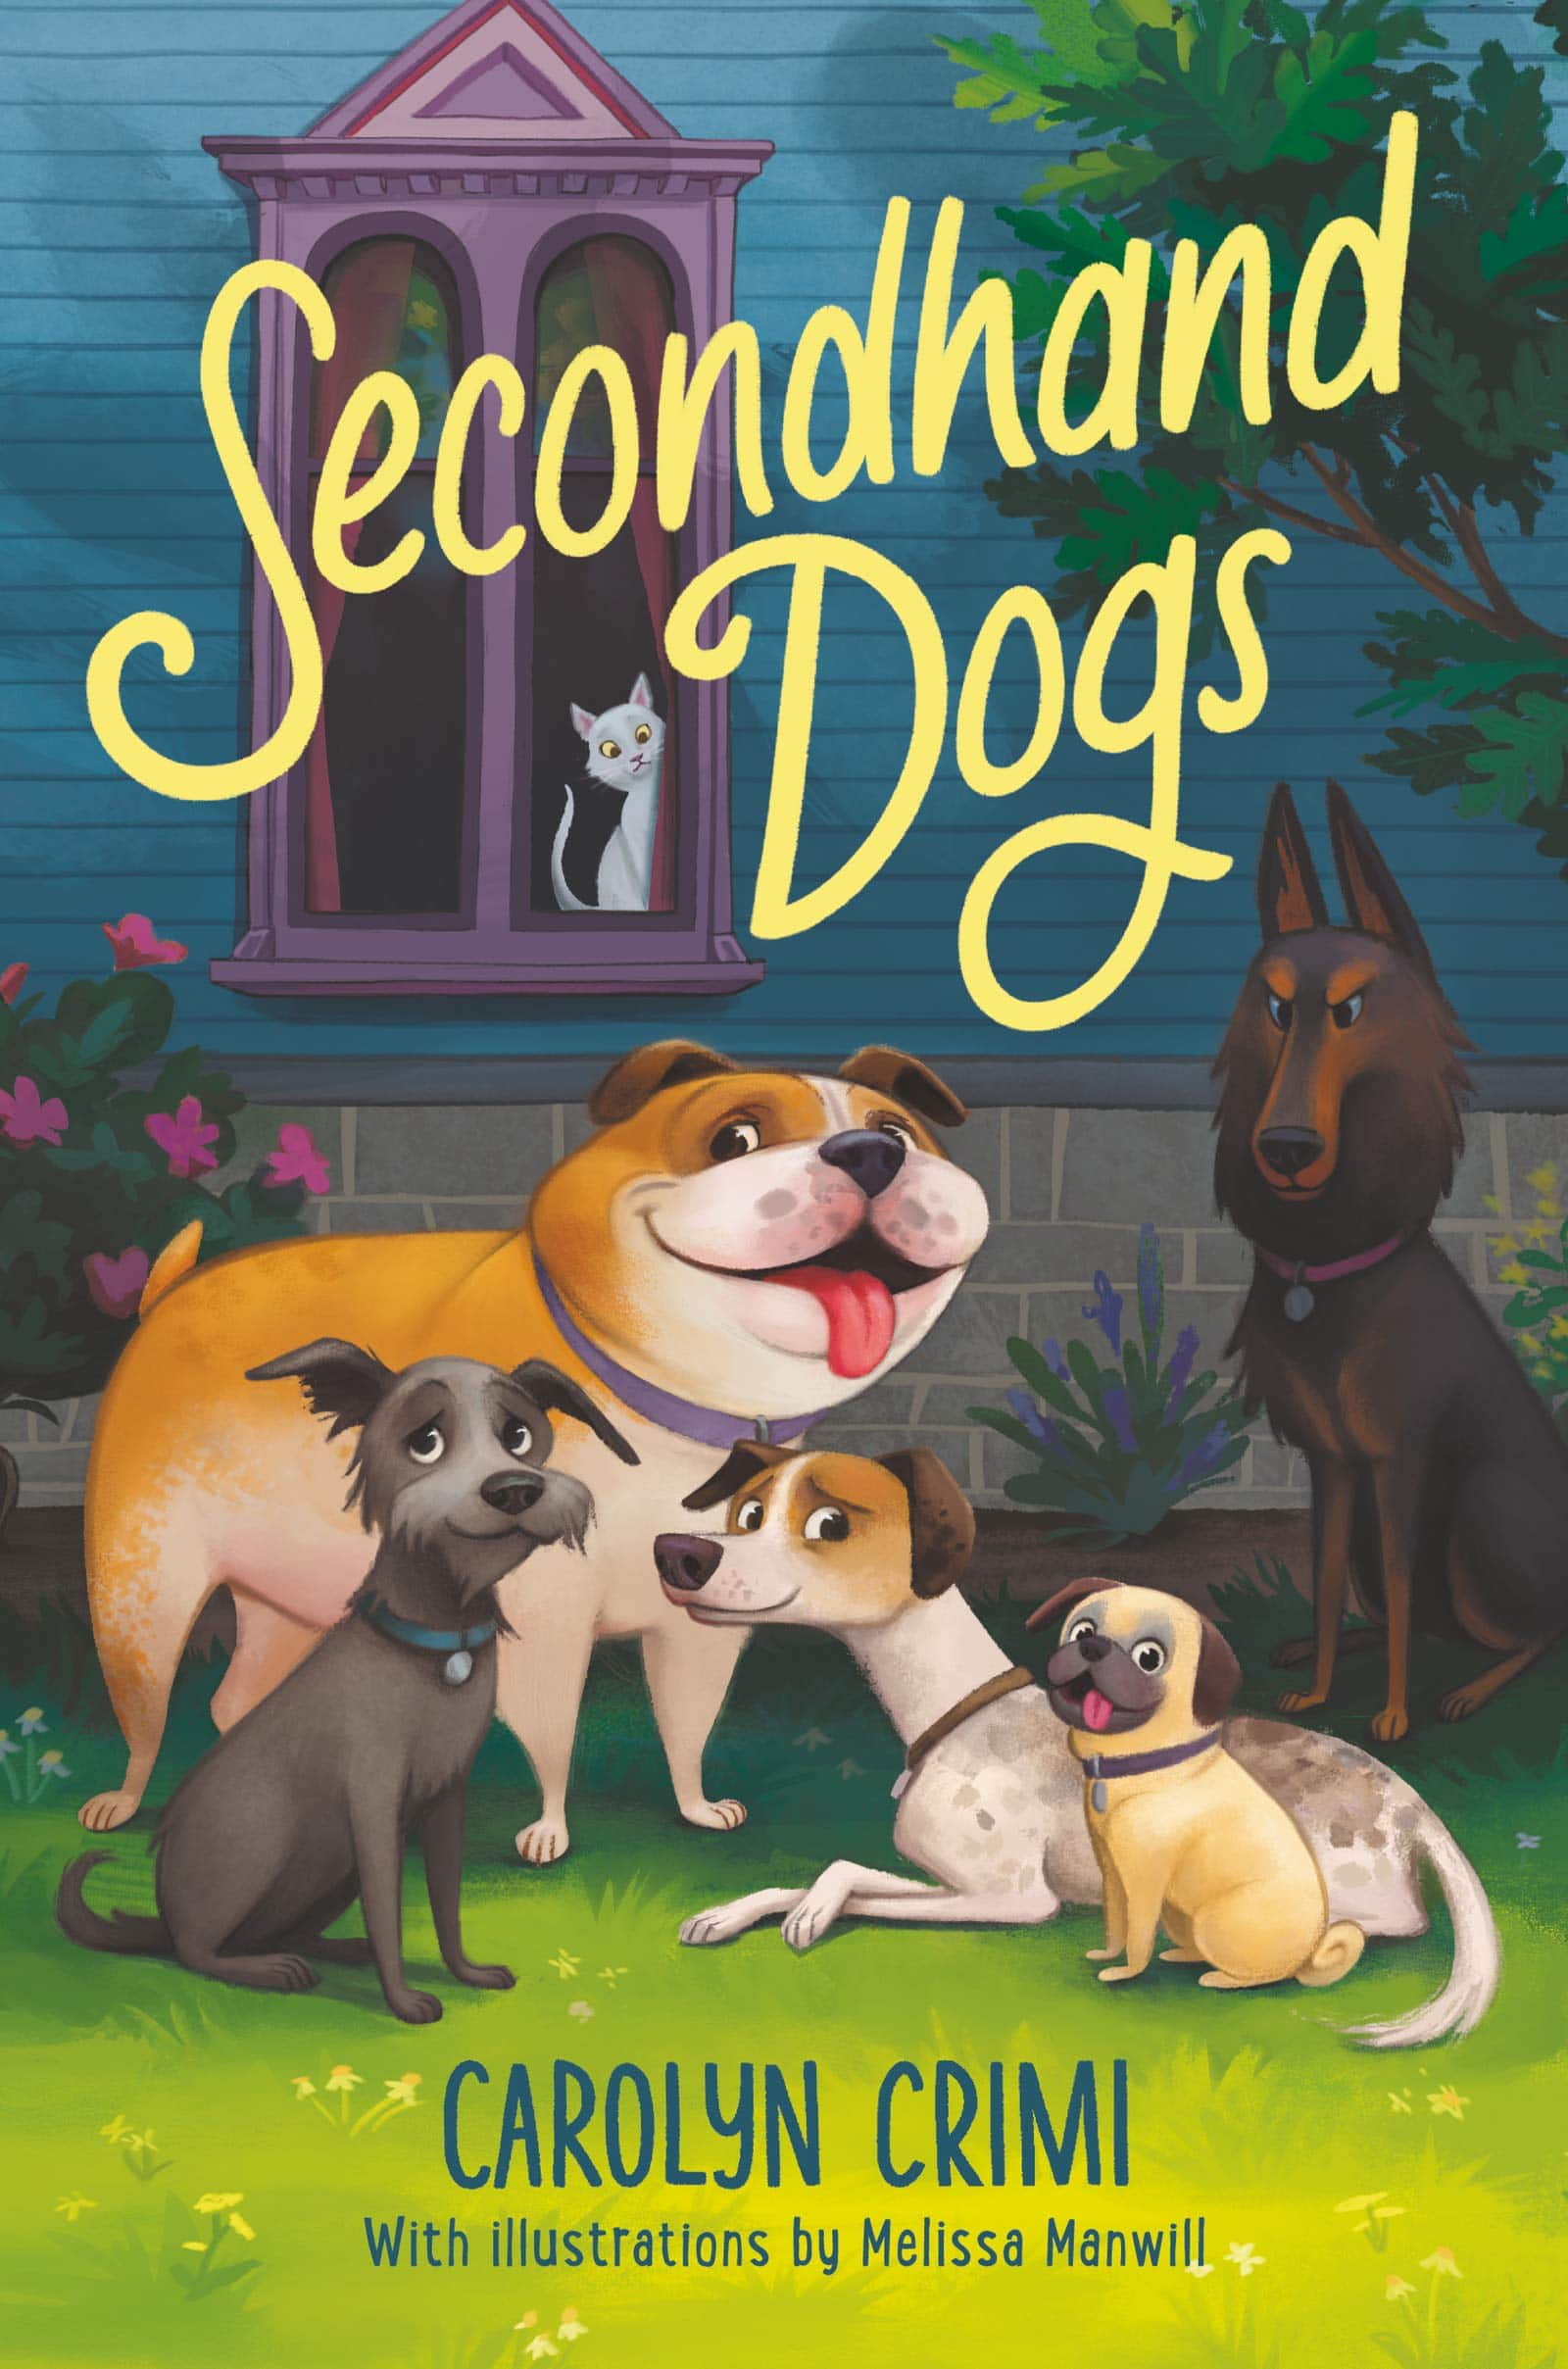 Secondhand Dogs Book Review